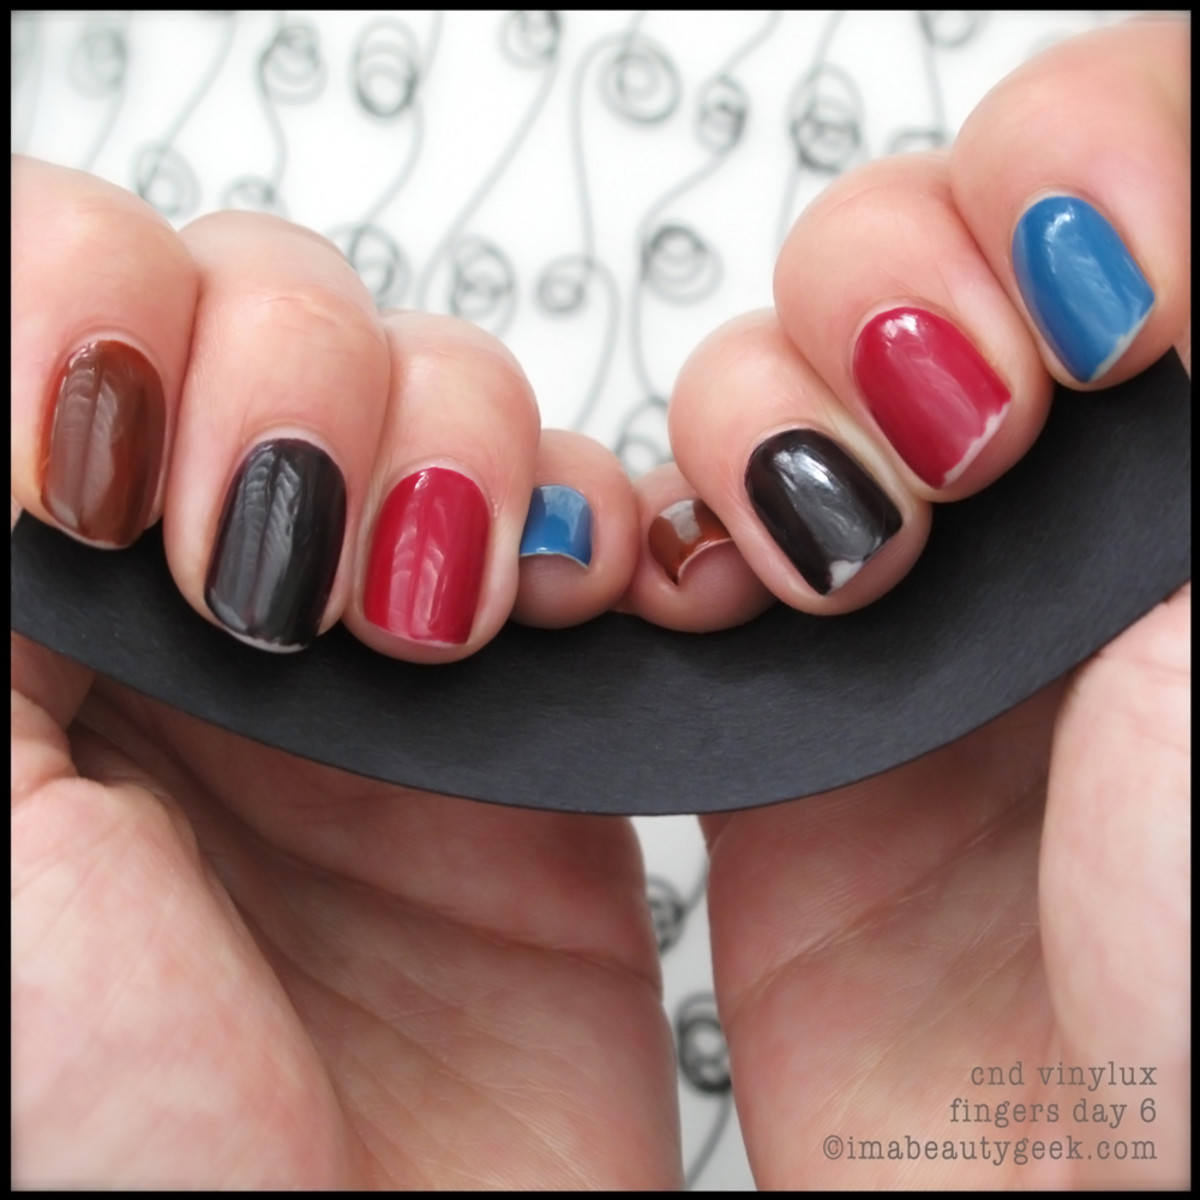 CND Vinylux review_Vinylux Forbidden Collection Day 6 Fingers